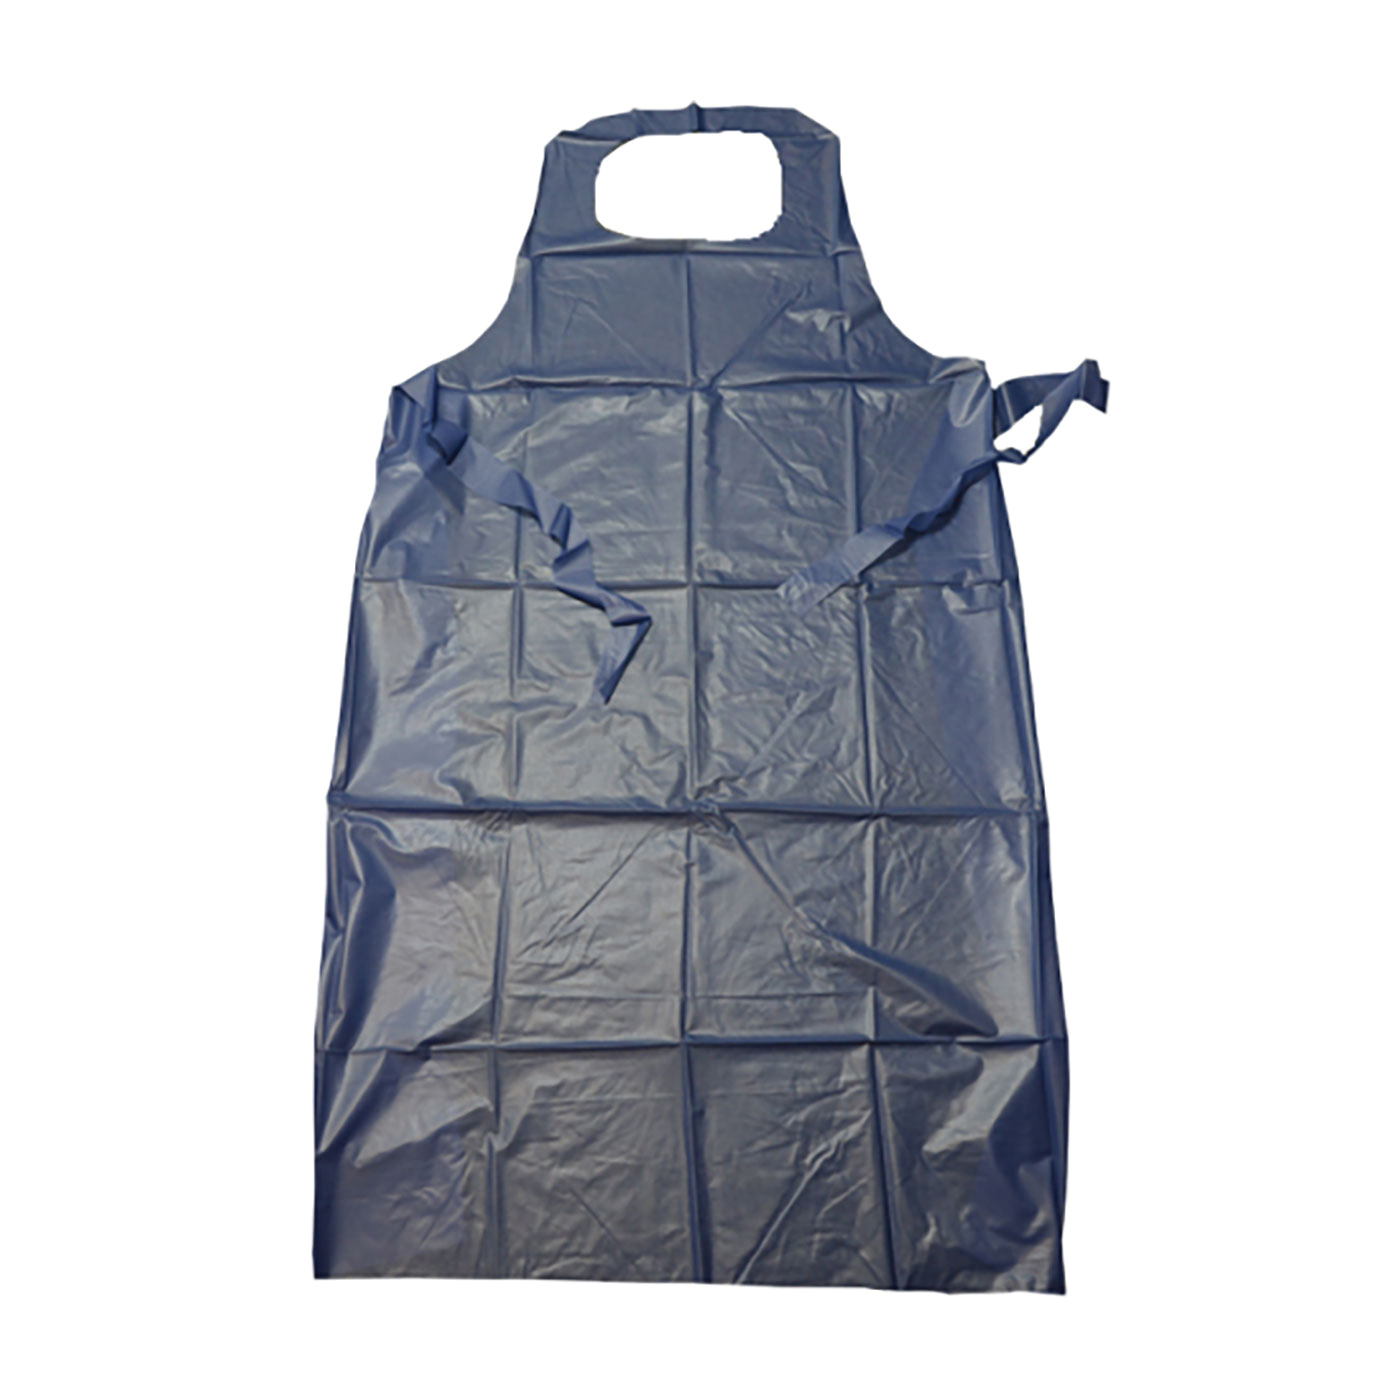 Disposable PVC Aprons. Pack of 12 Blue Vinyl Aprons 35 x 45. Raw Cut  Finish PVC Aprons 6 Mil. Unisex Waterproof and Tear Resistant Workwear.